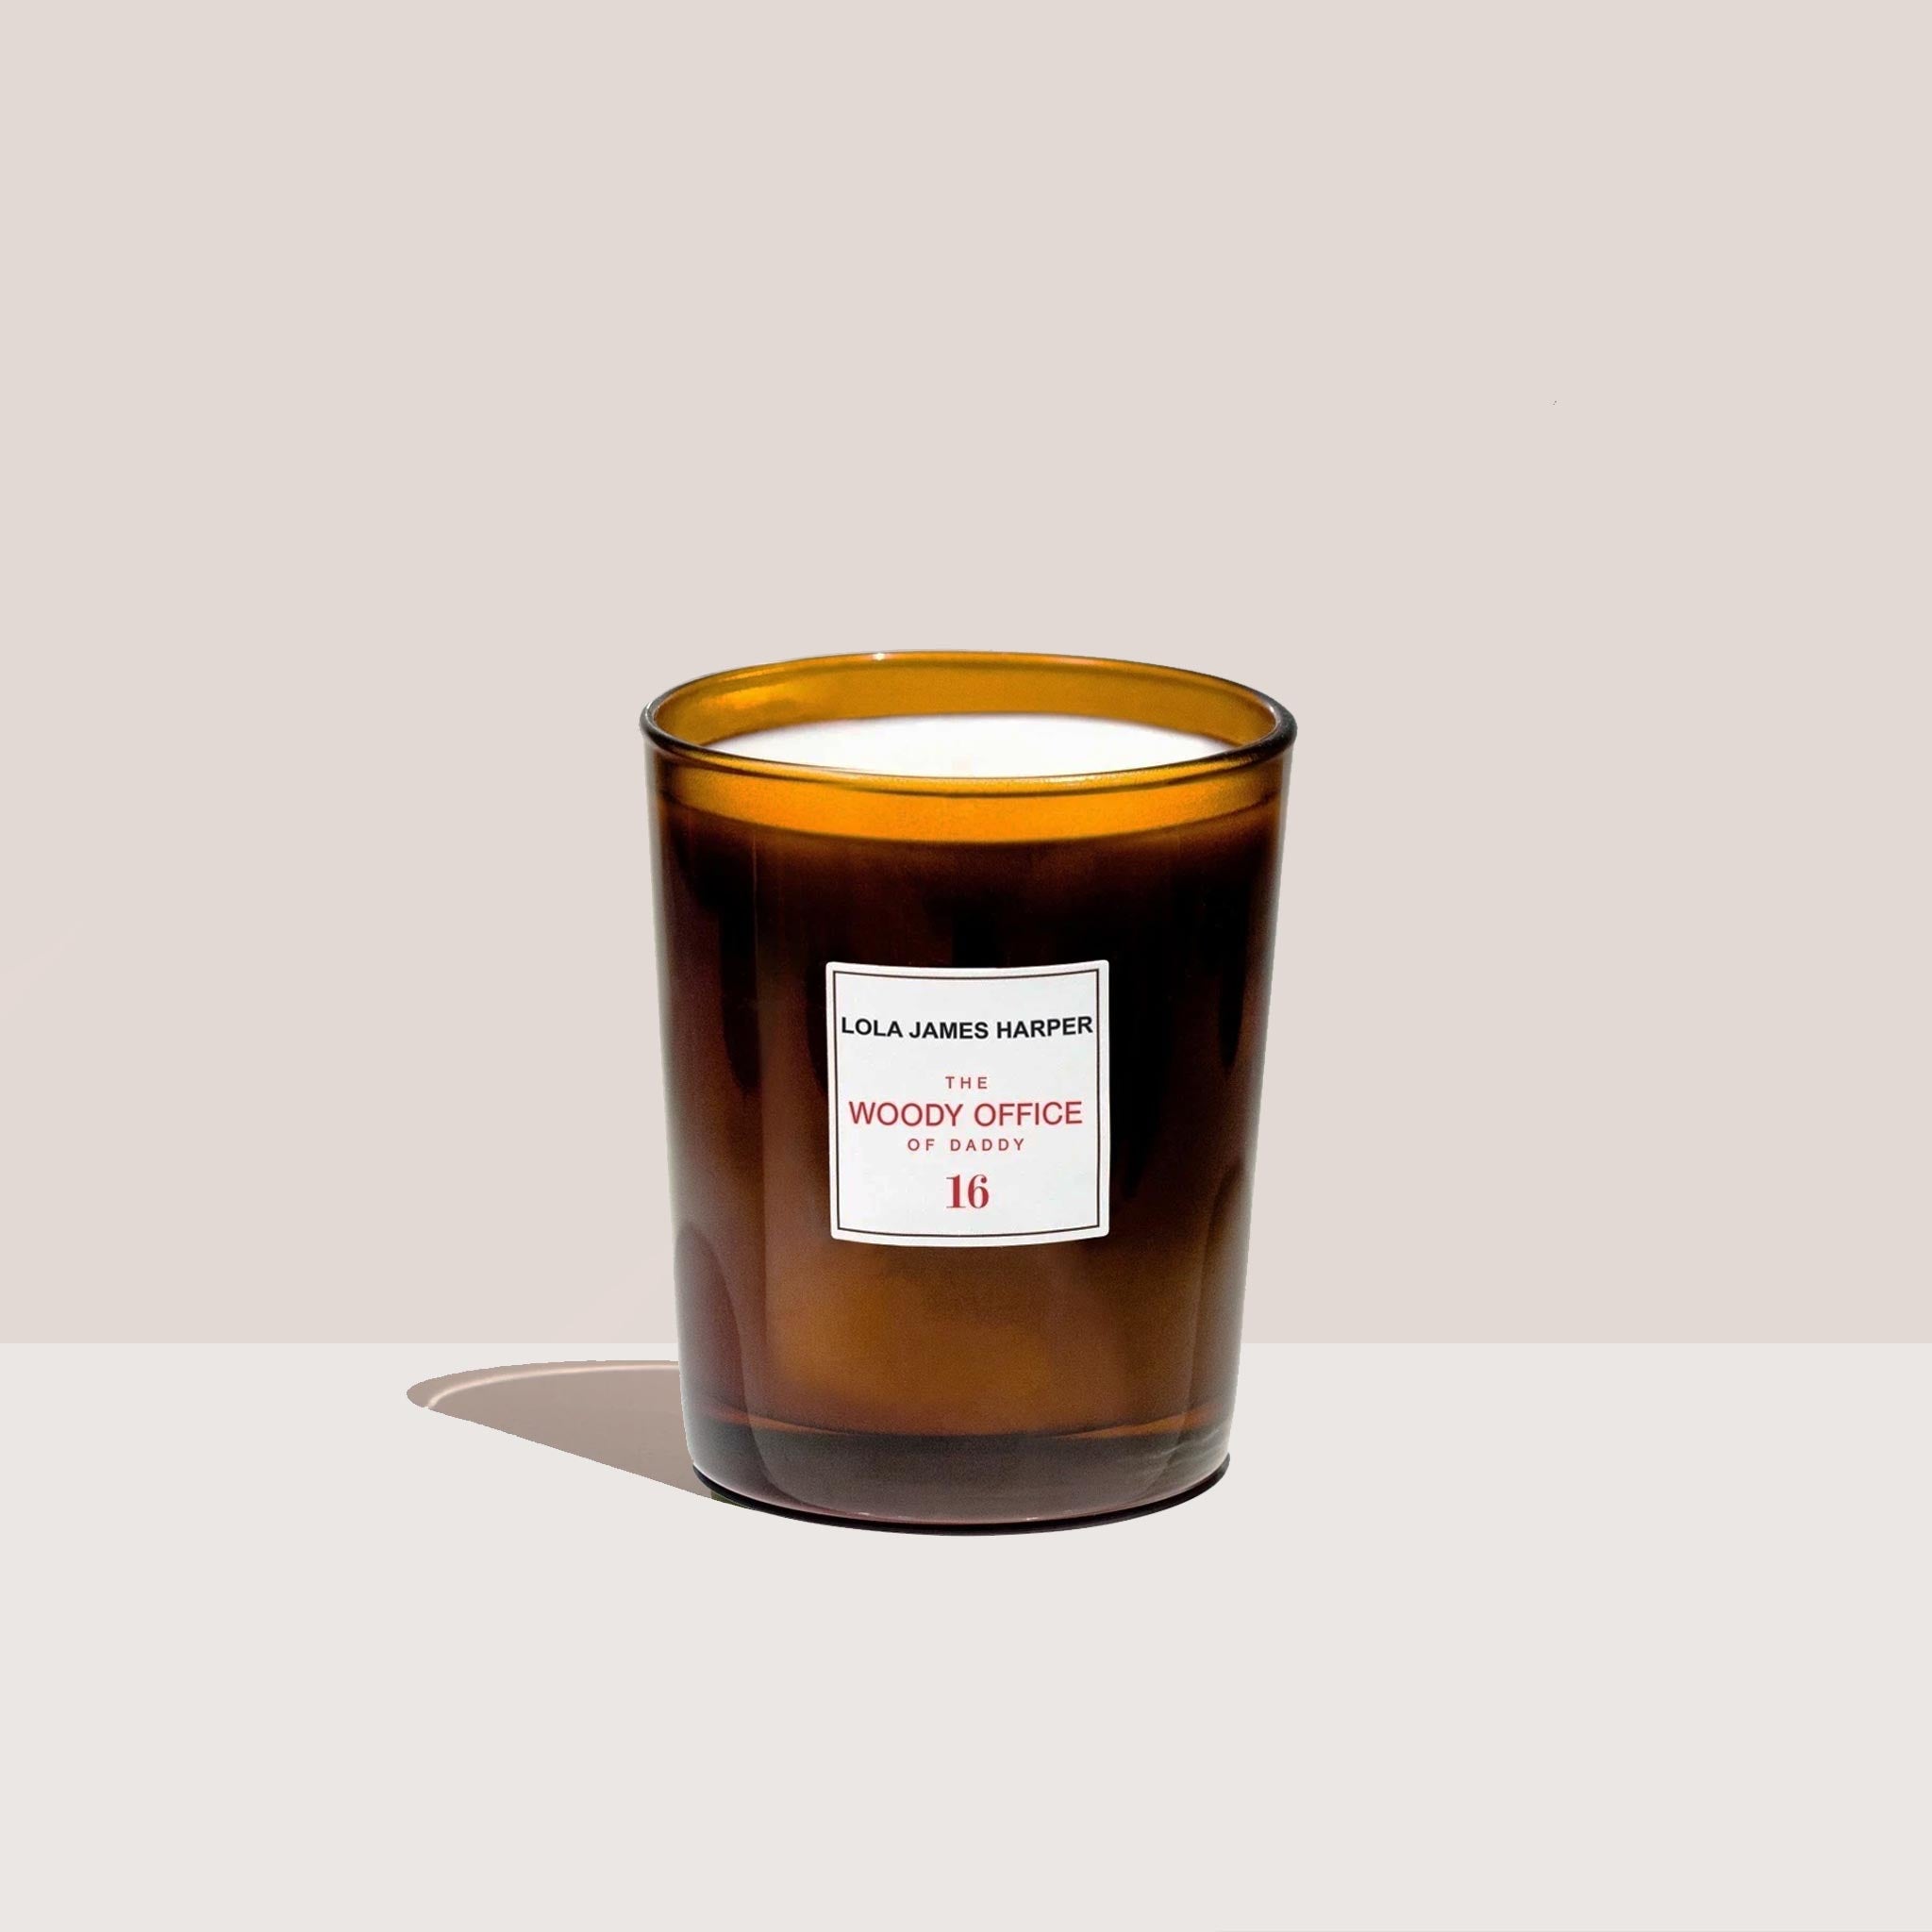 Lola James Harper - Woody Office Candle, available at LCD.